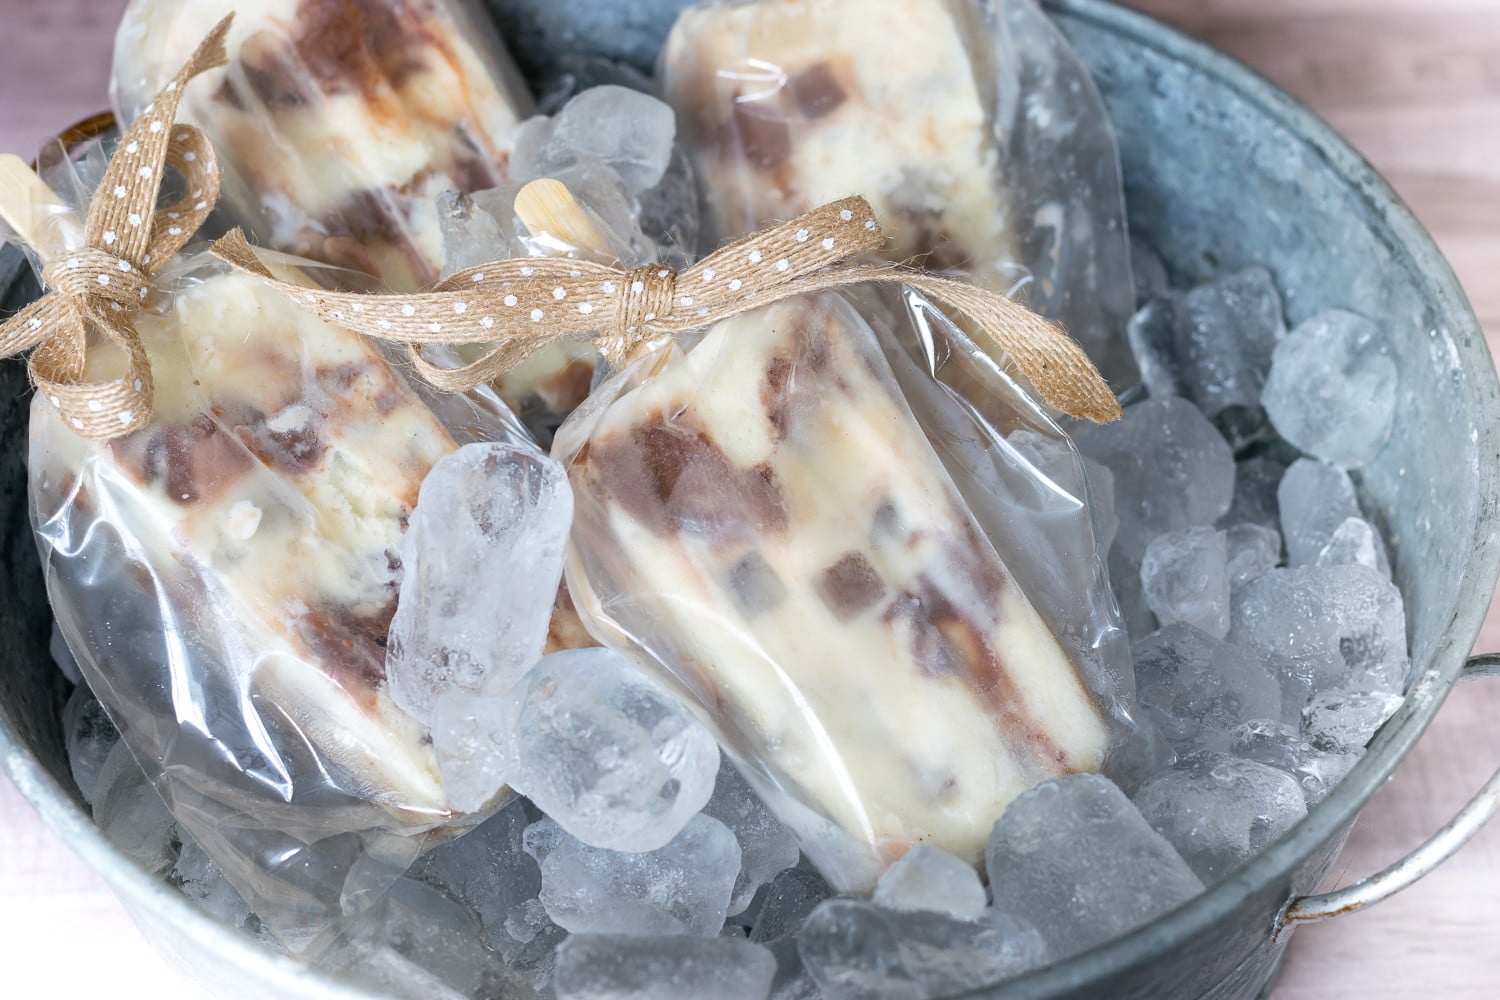 Tuck these Popsicles in treat bags and serve over ice at your next gathering.